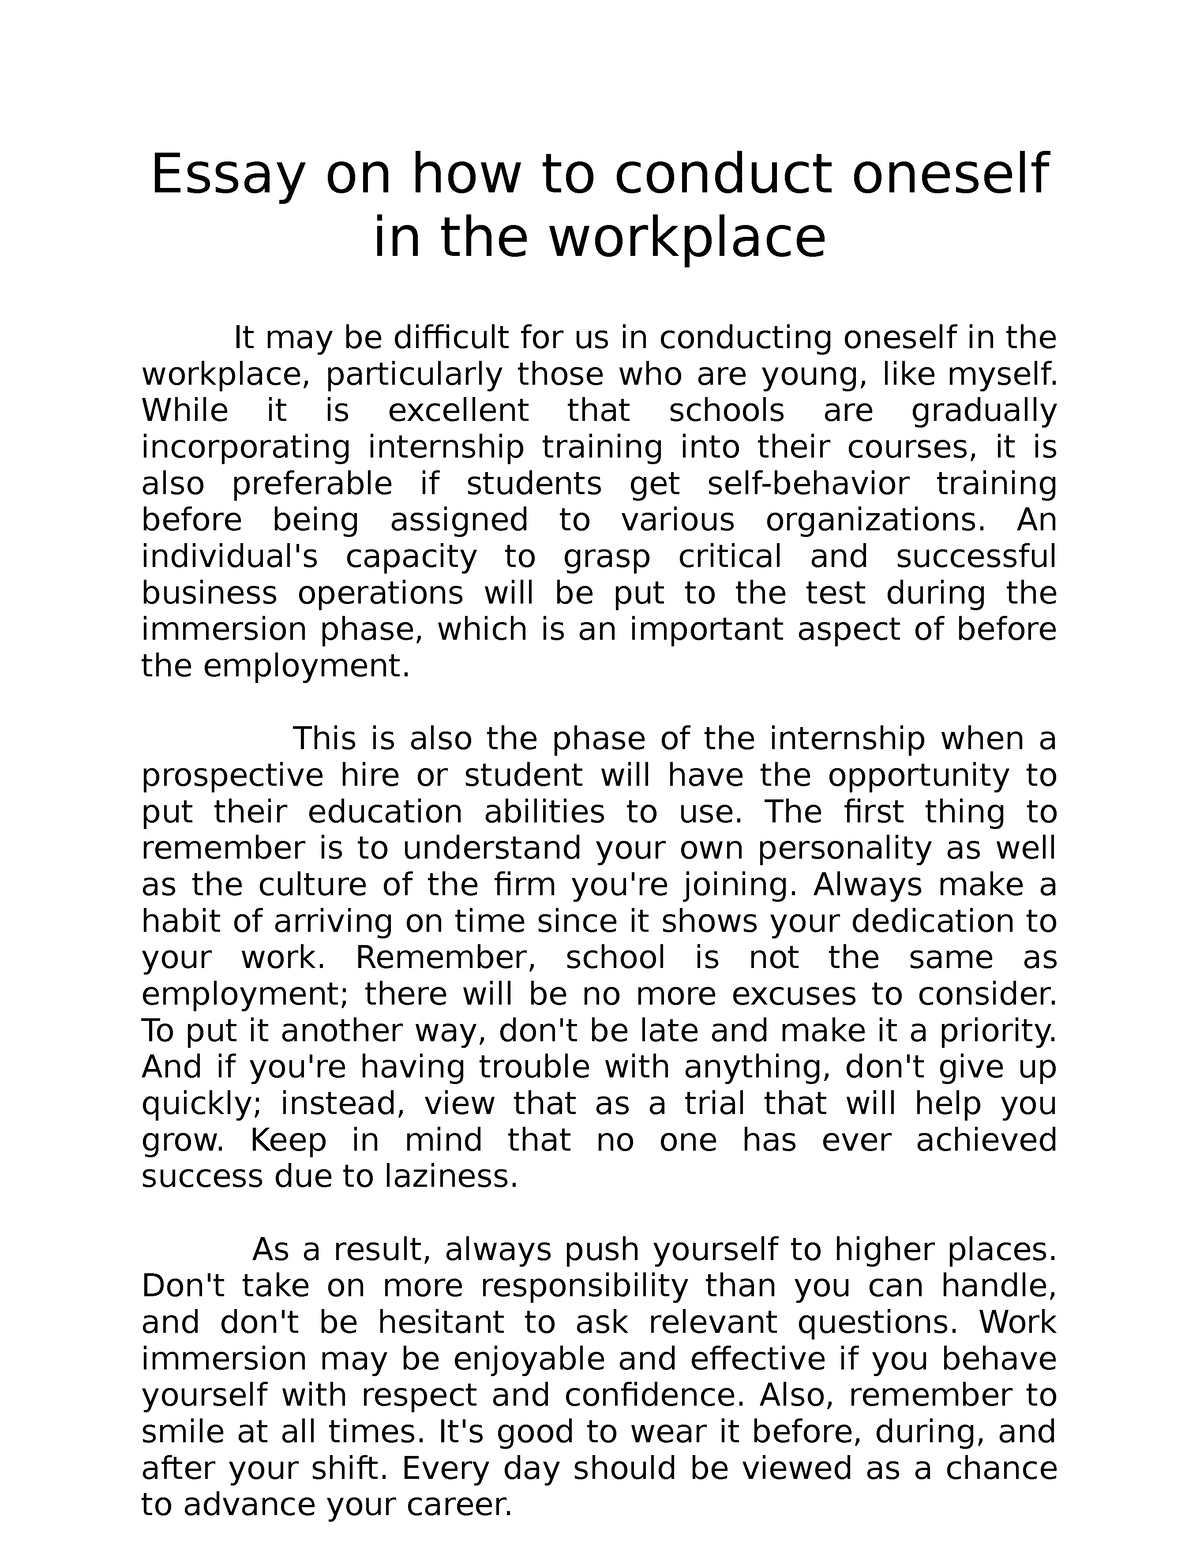 essay about how to conduct oneself in work immersion